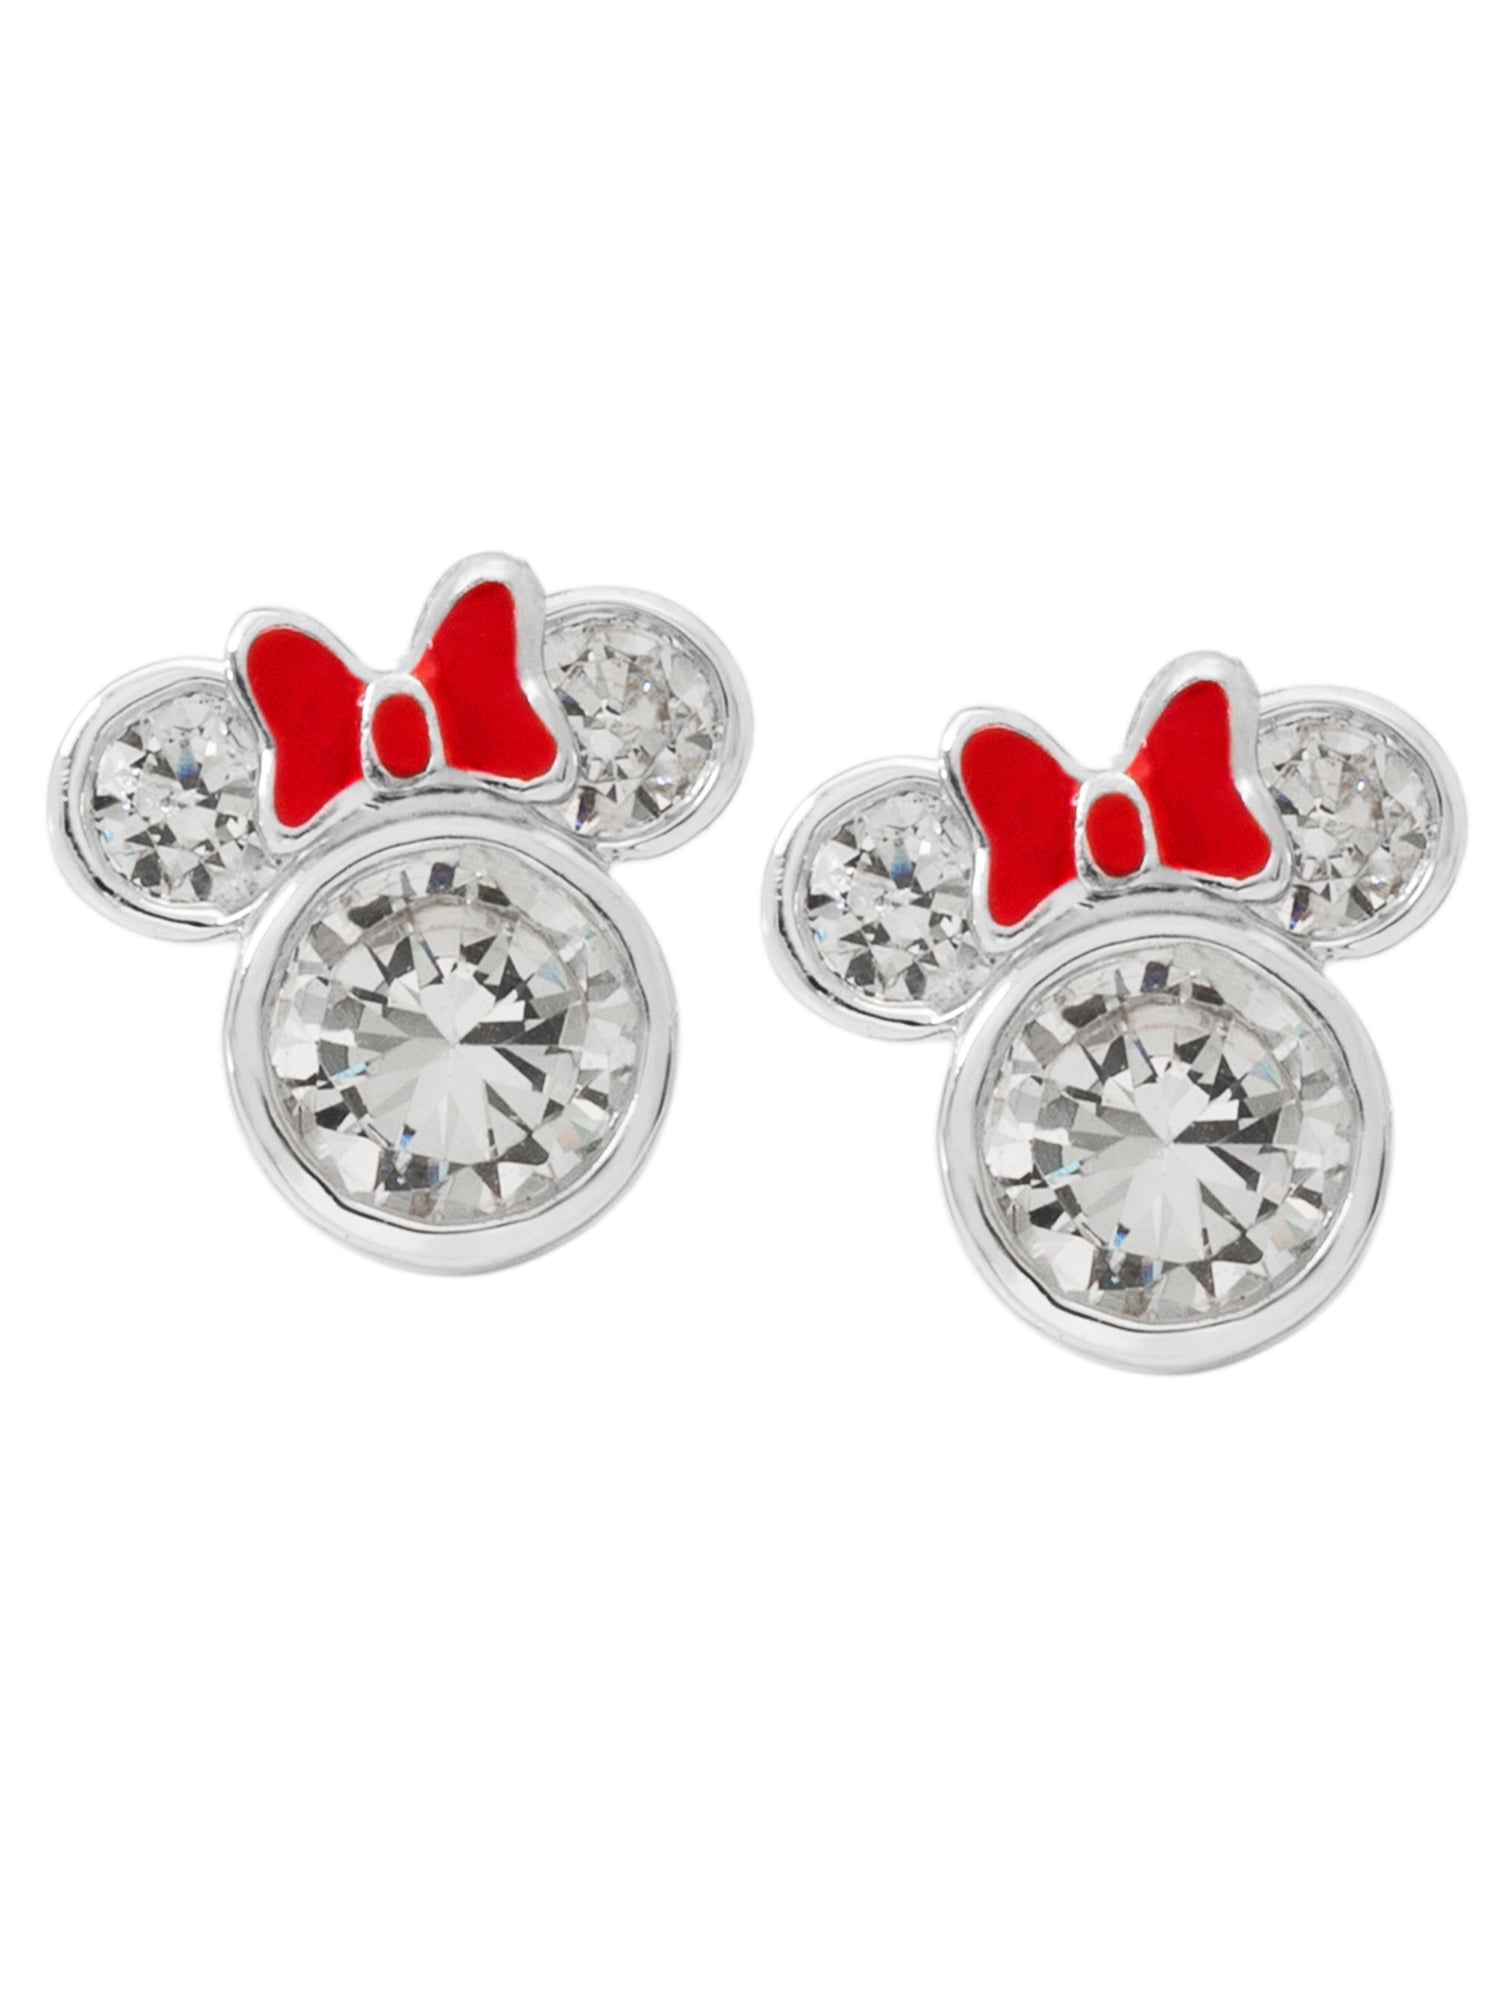 Dazzling Platinum Mickey Mouse Heart Shaped Cubic Zirconia Stud Earrings 